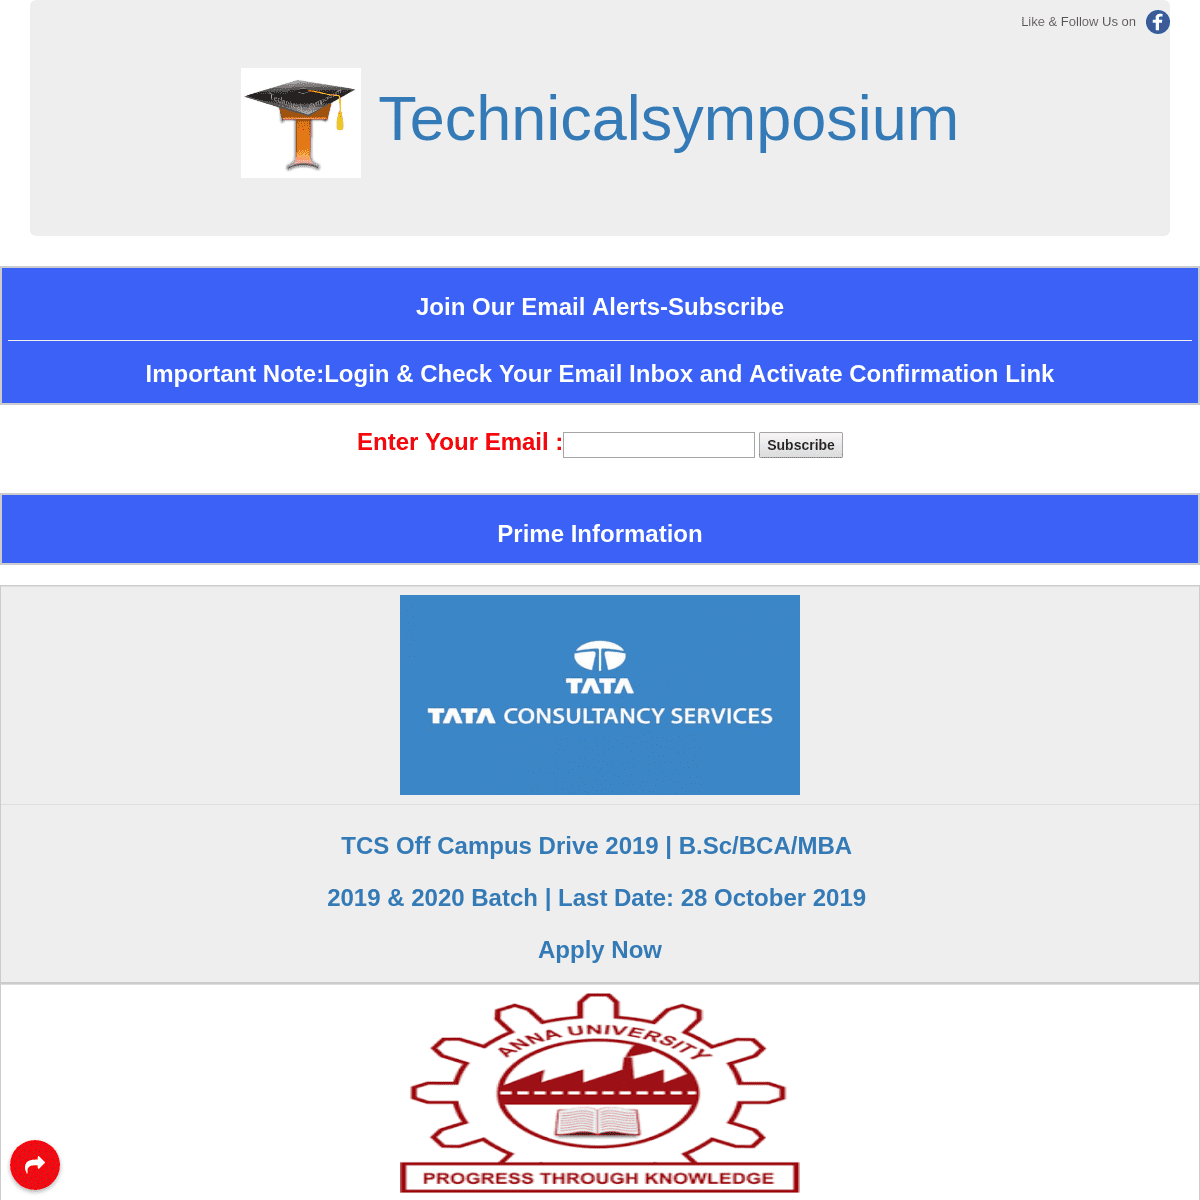 A complete backup of technicalsymposium.com